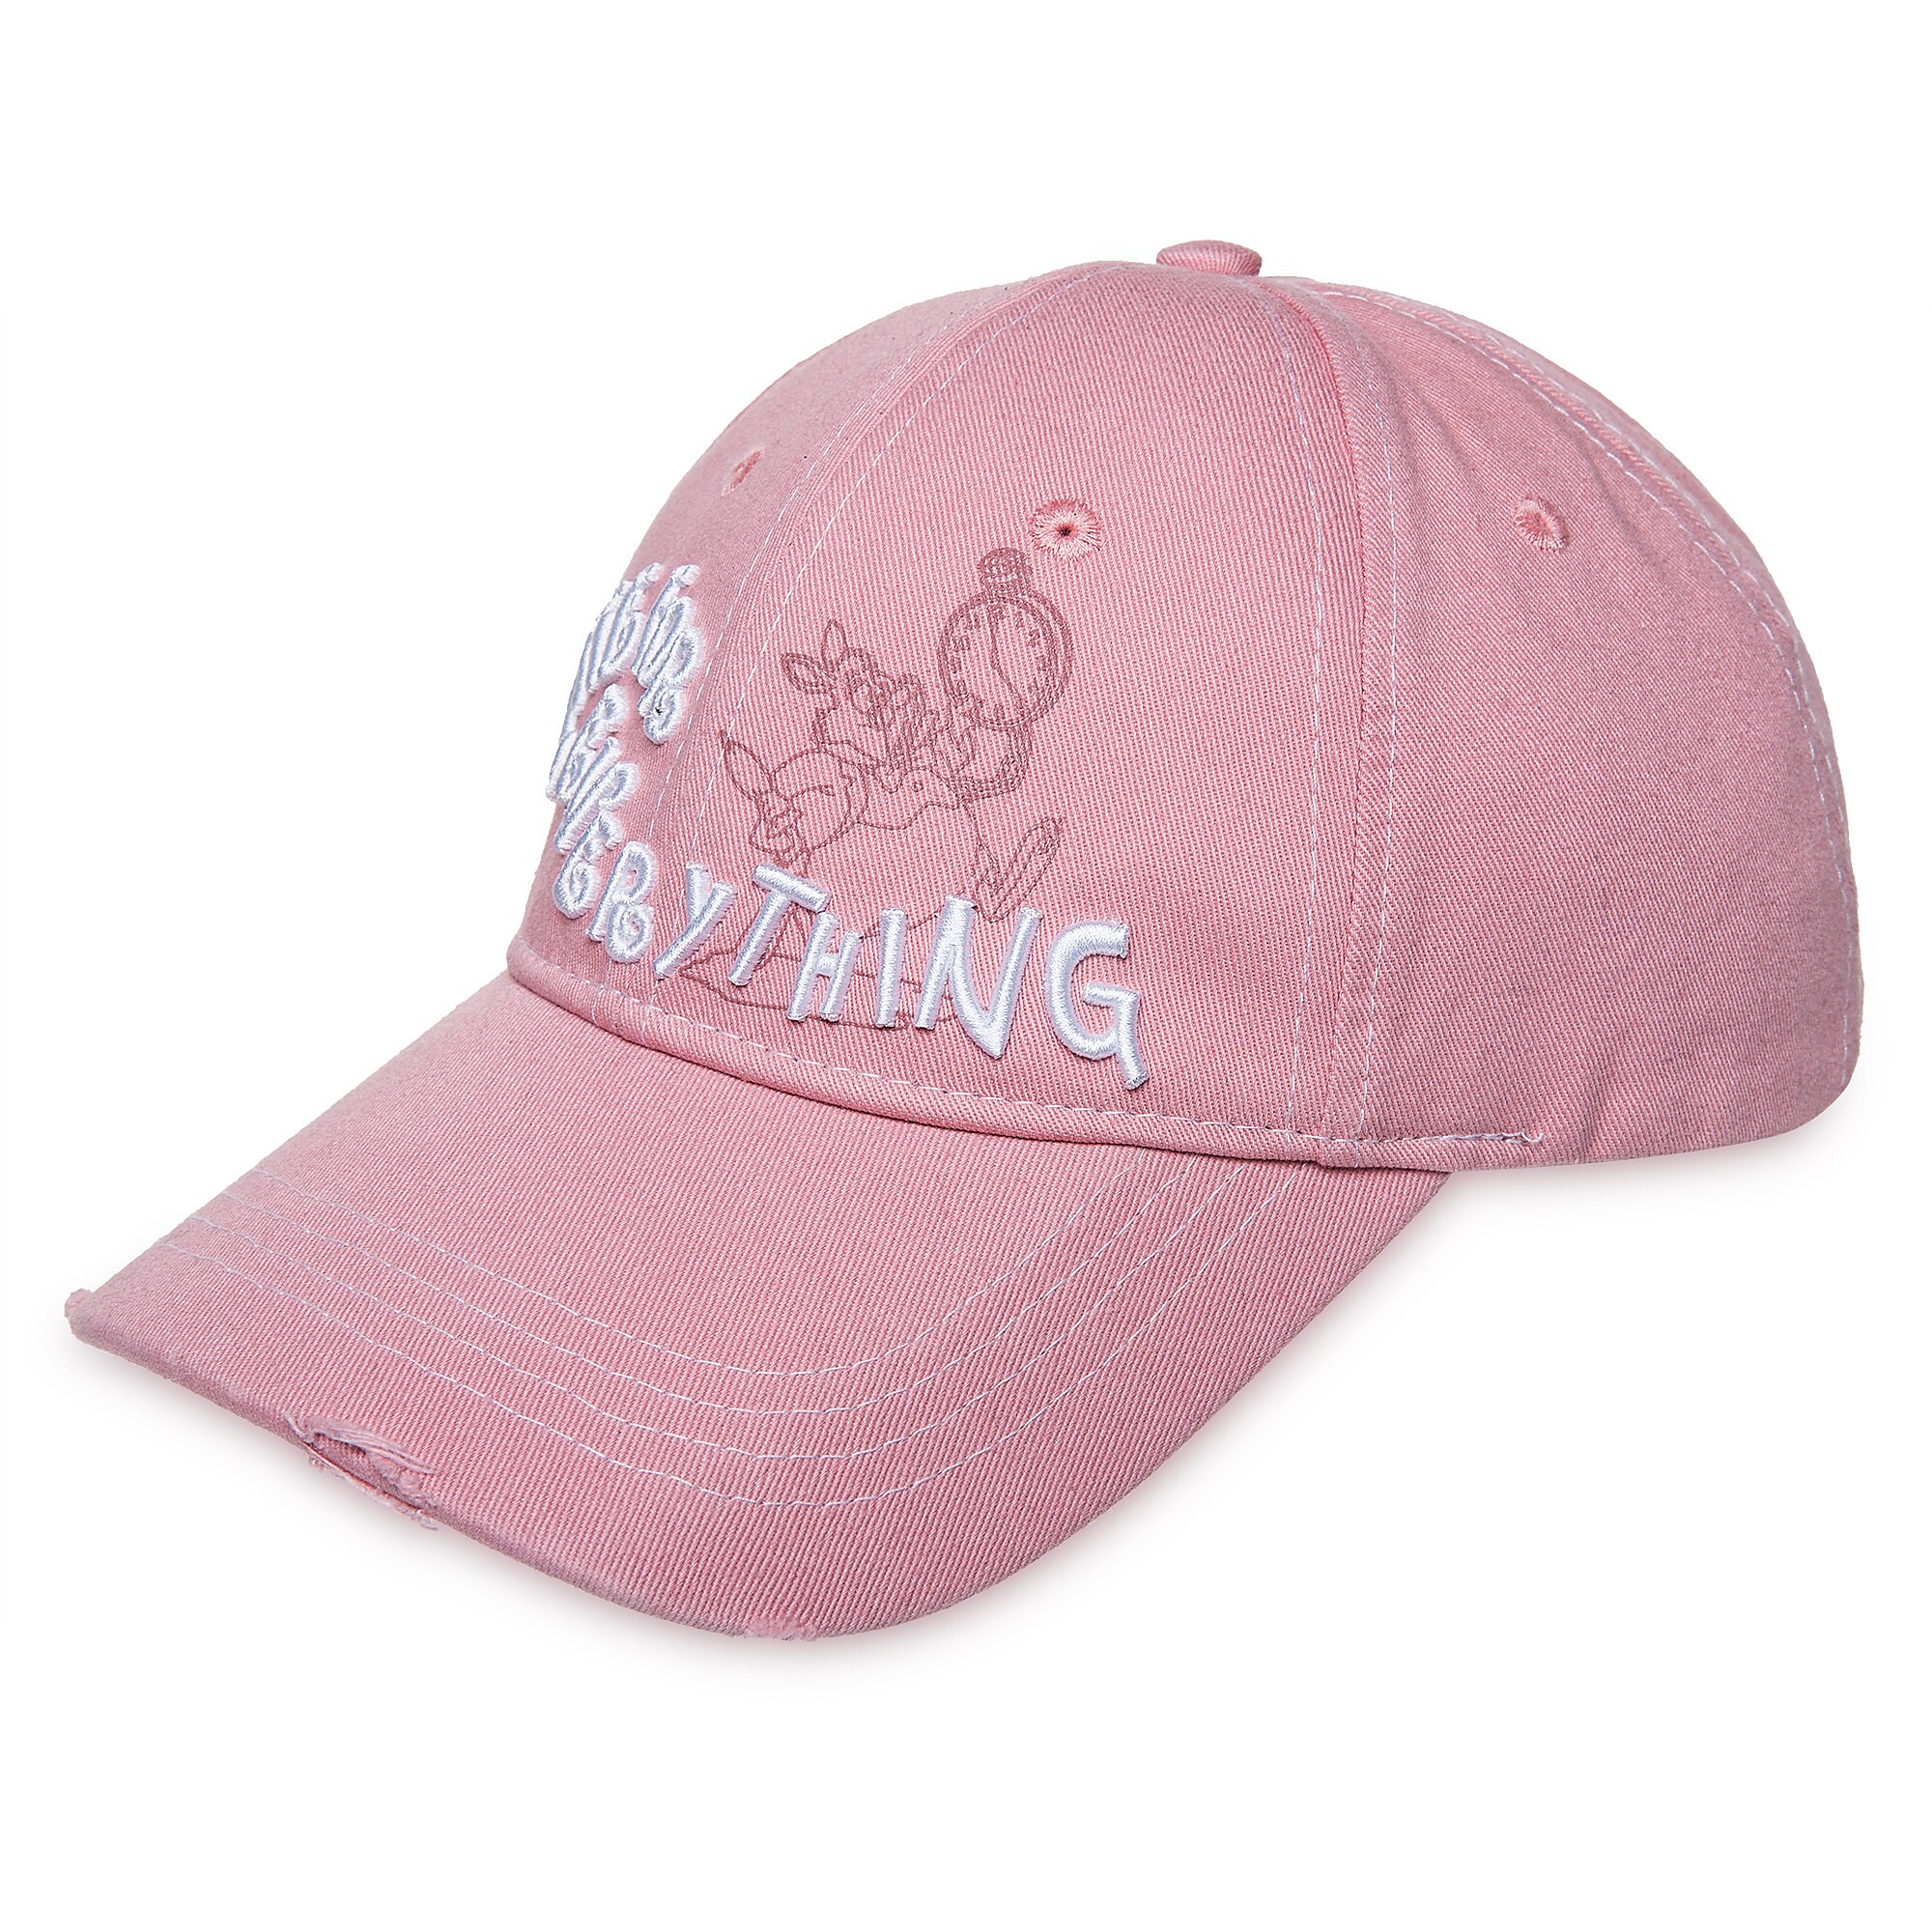 White Rabbit ''Late For Everything'' Baseball Cap for Adults - Alice in Wonderland